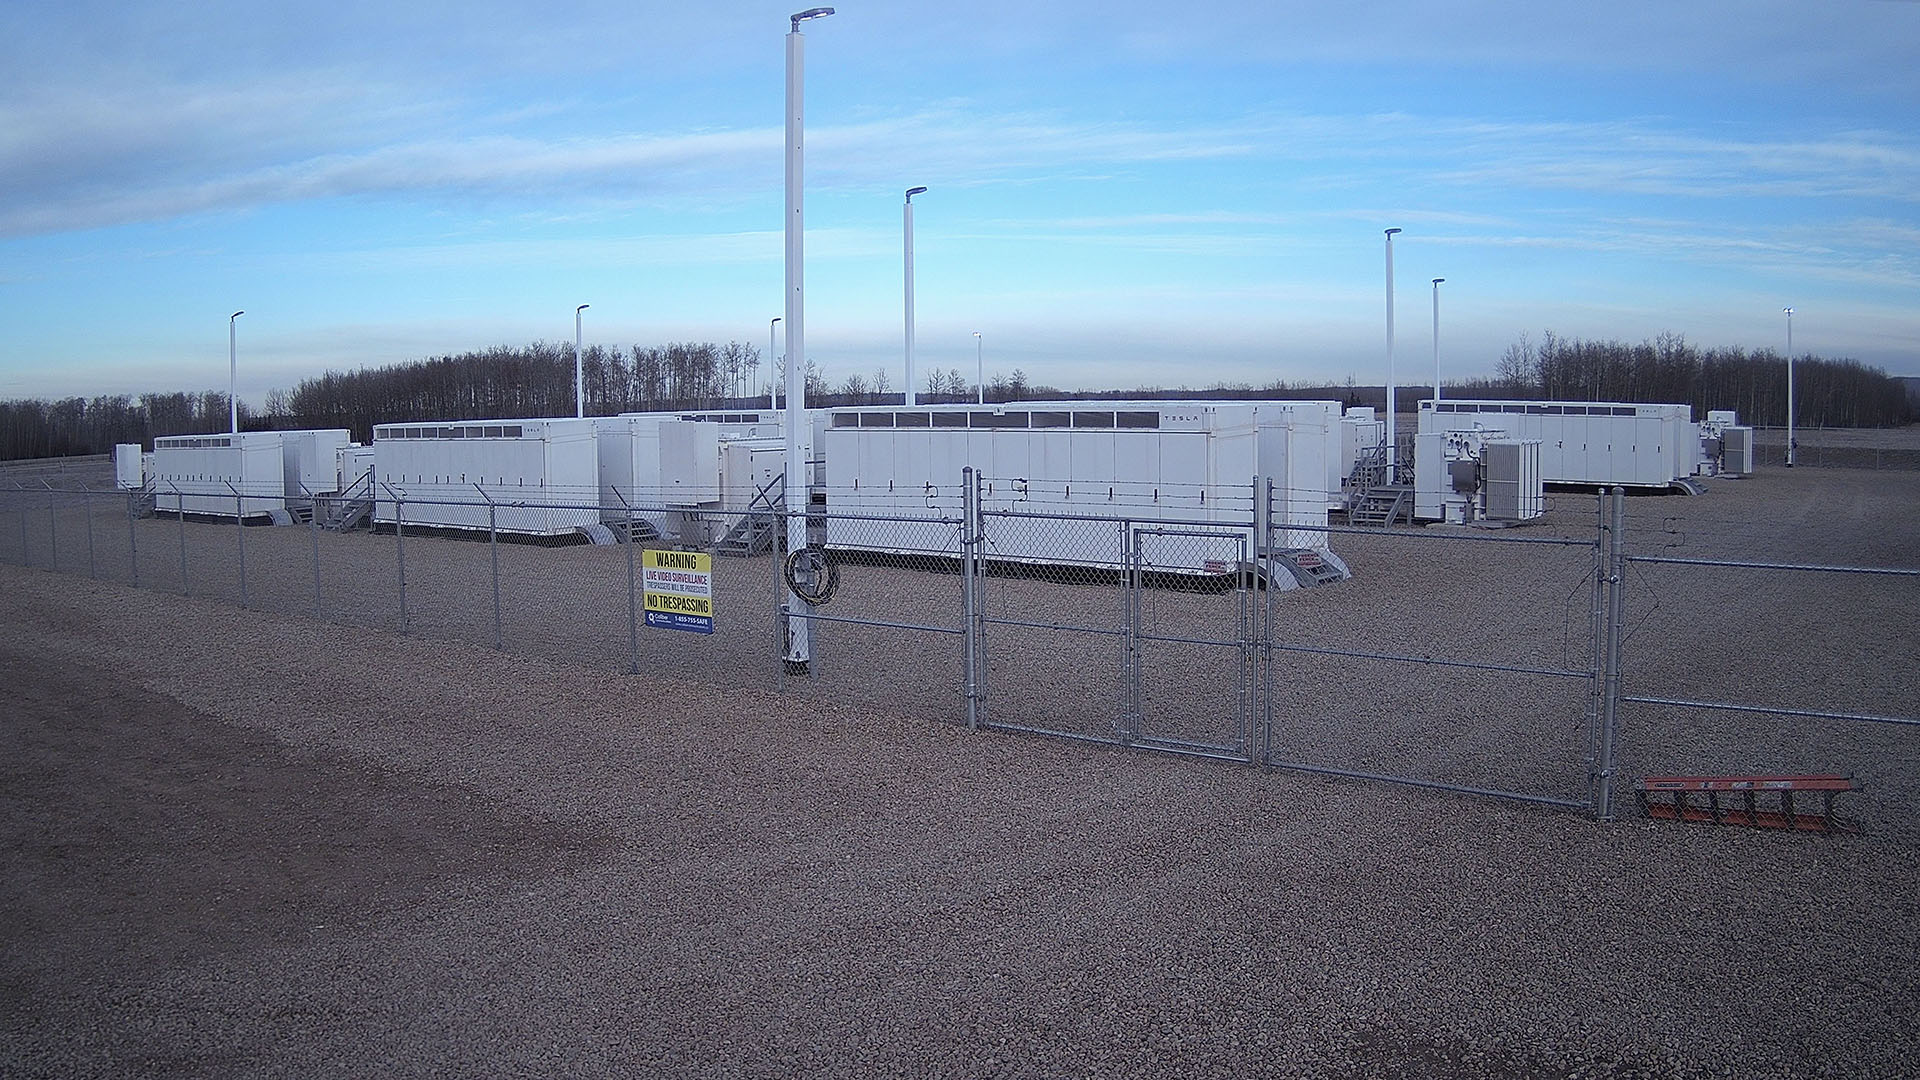 Enfinite's eReserve battery storage facility, protected by Caliber's Live Remote Video Monitoring